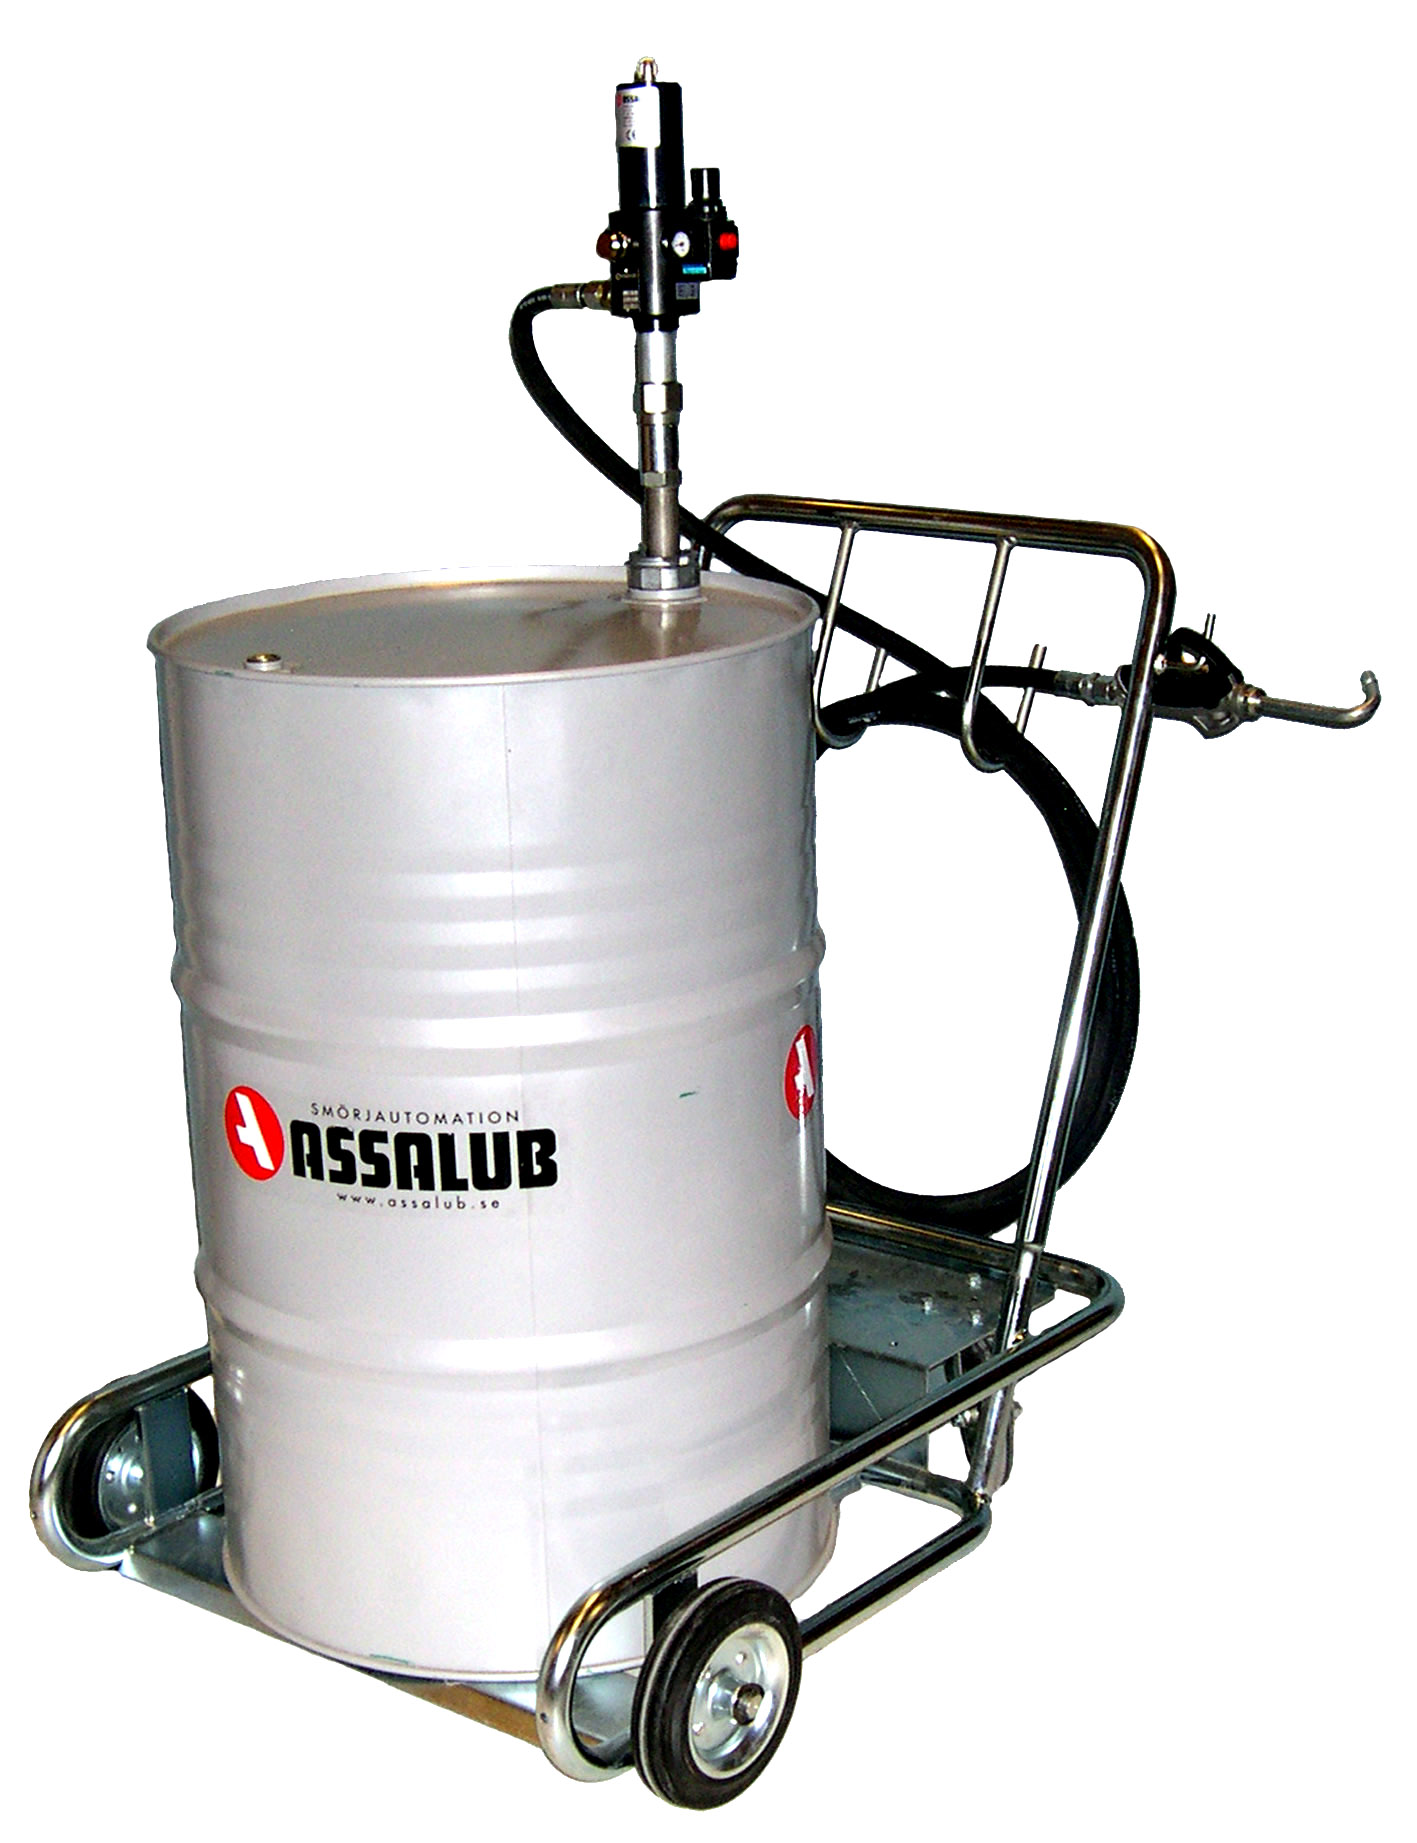 Mobile oil unit, for 1/1-drum, with air-operated pump, ratio 1:3 and  digital hand meter